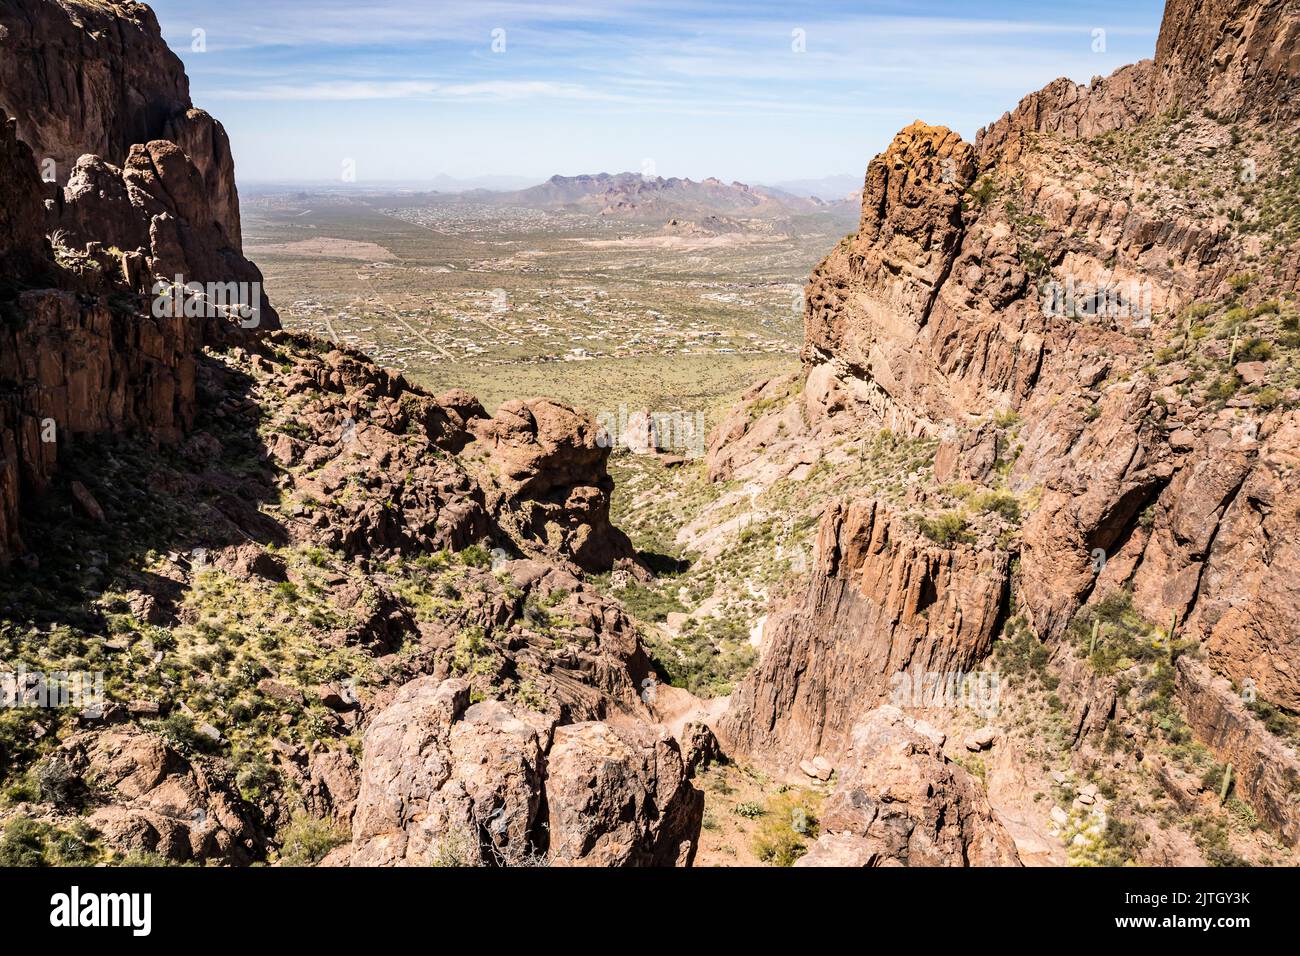 Looking back down on the Siphon Draw Trail in Lost Dutchman State Park, Arizona. Phoenix in the distance. Stock Photo